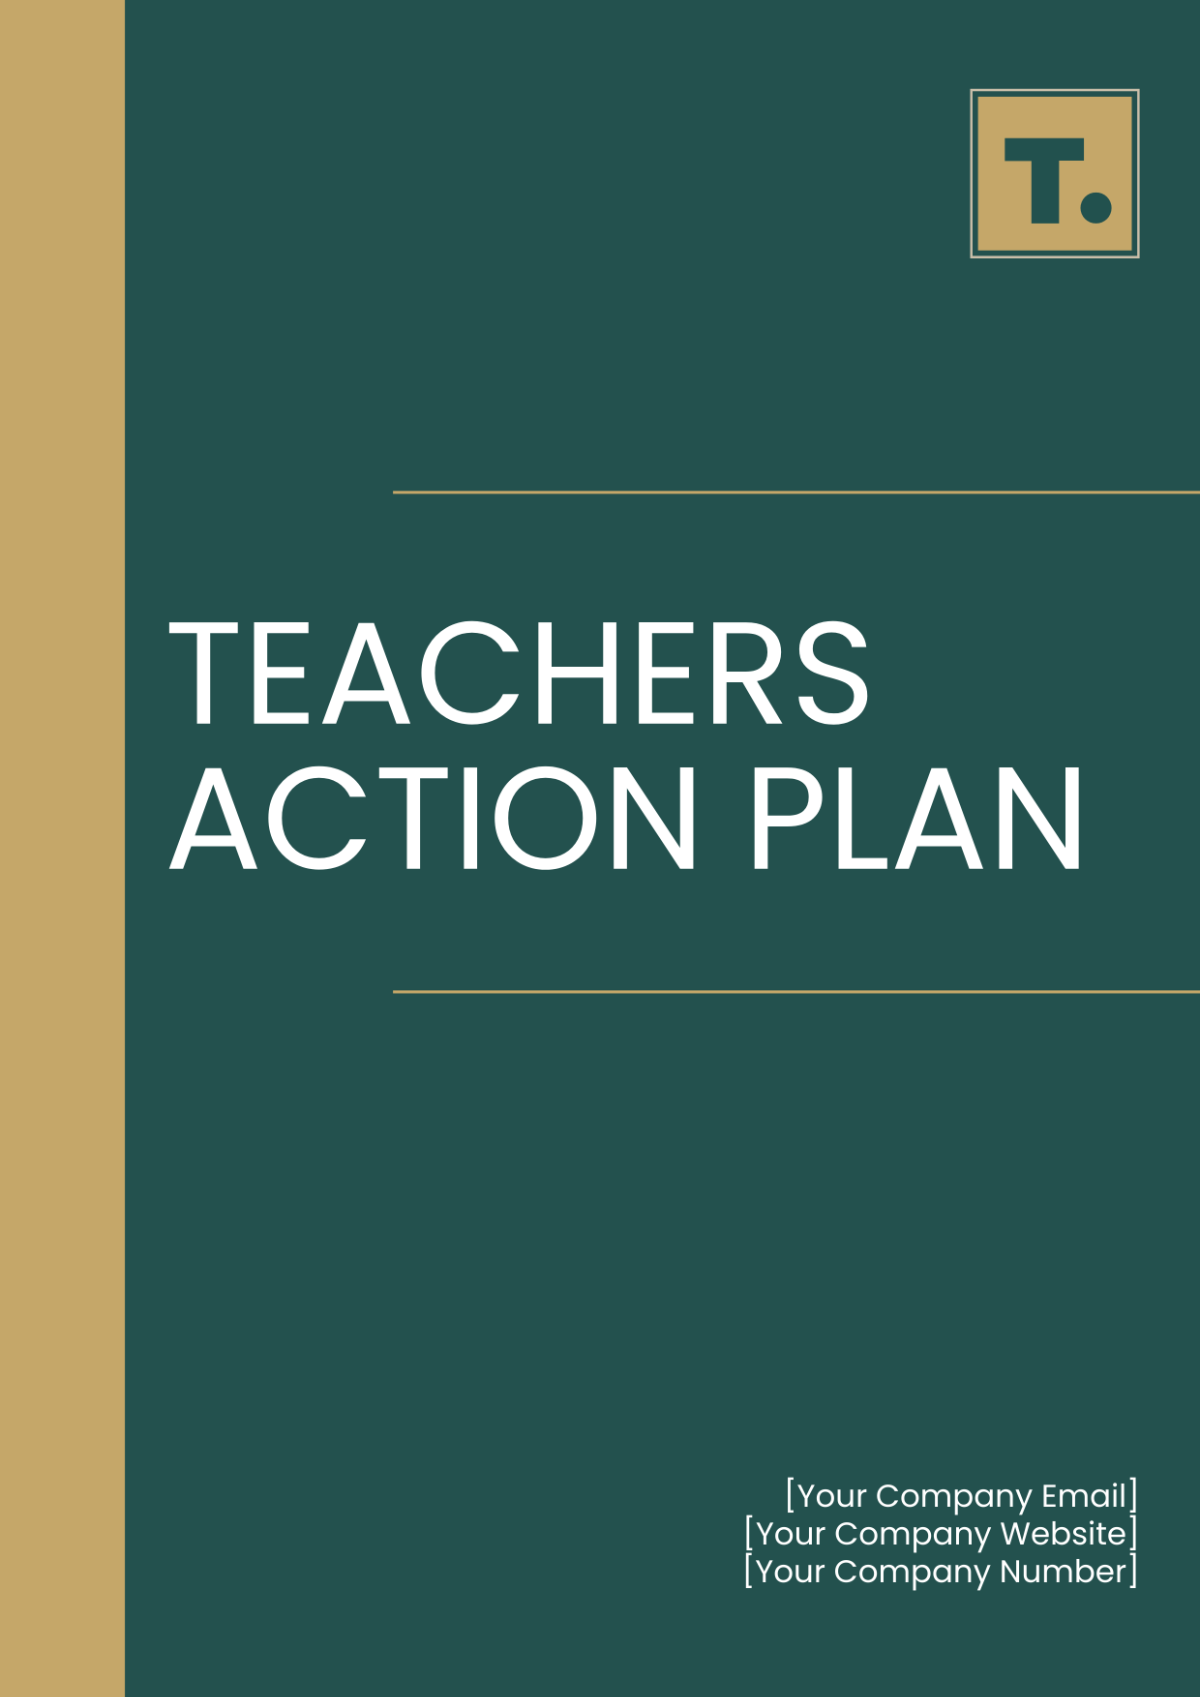 Free Action Plan Template For Teachers